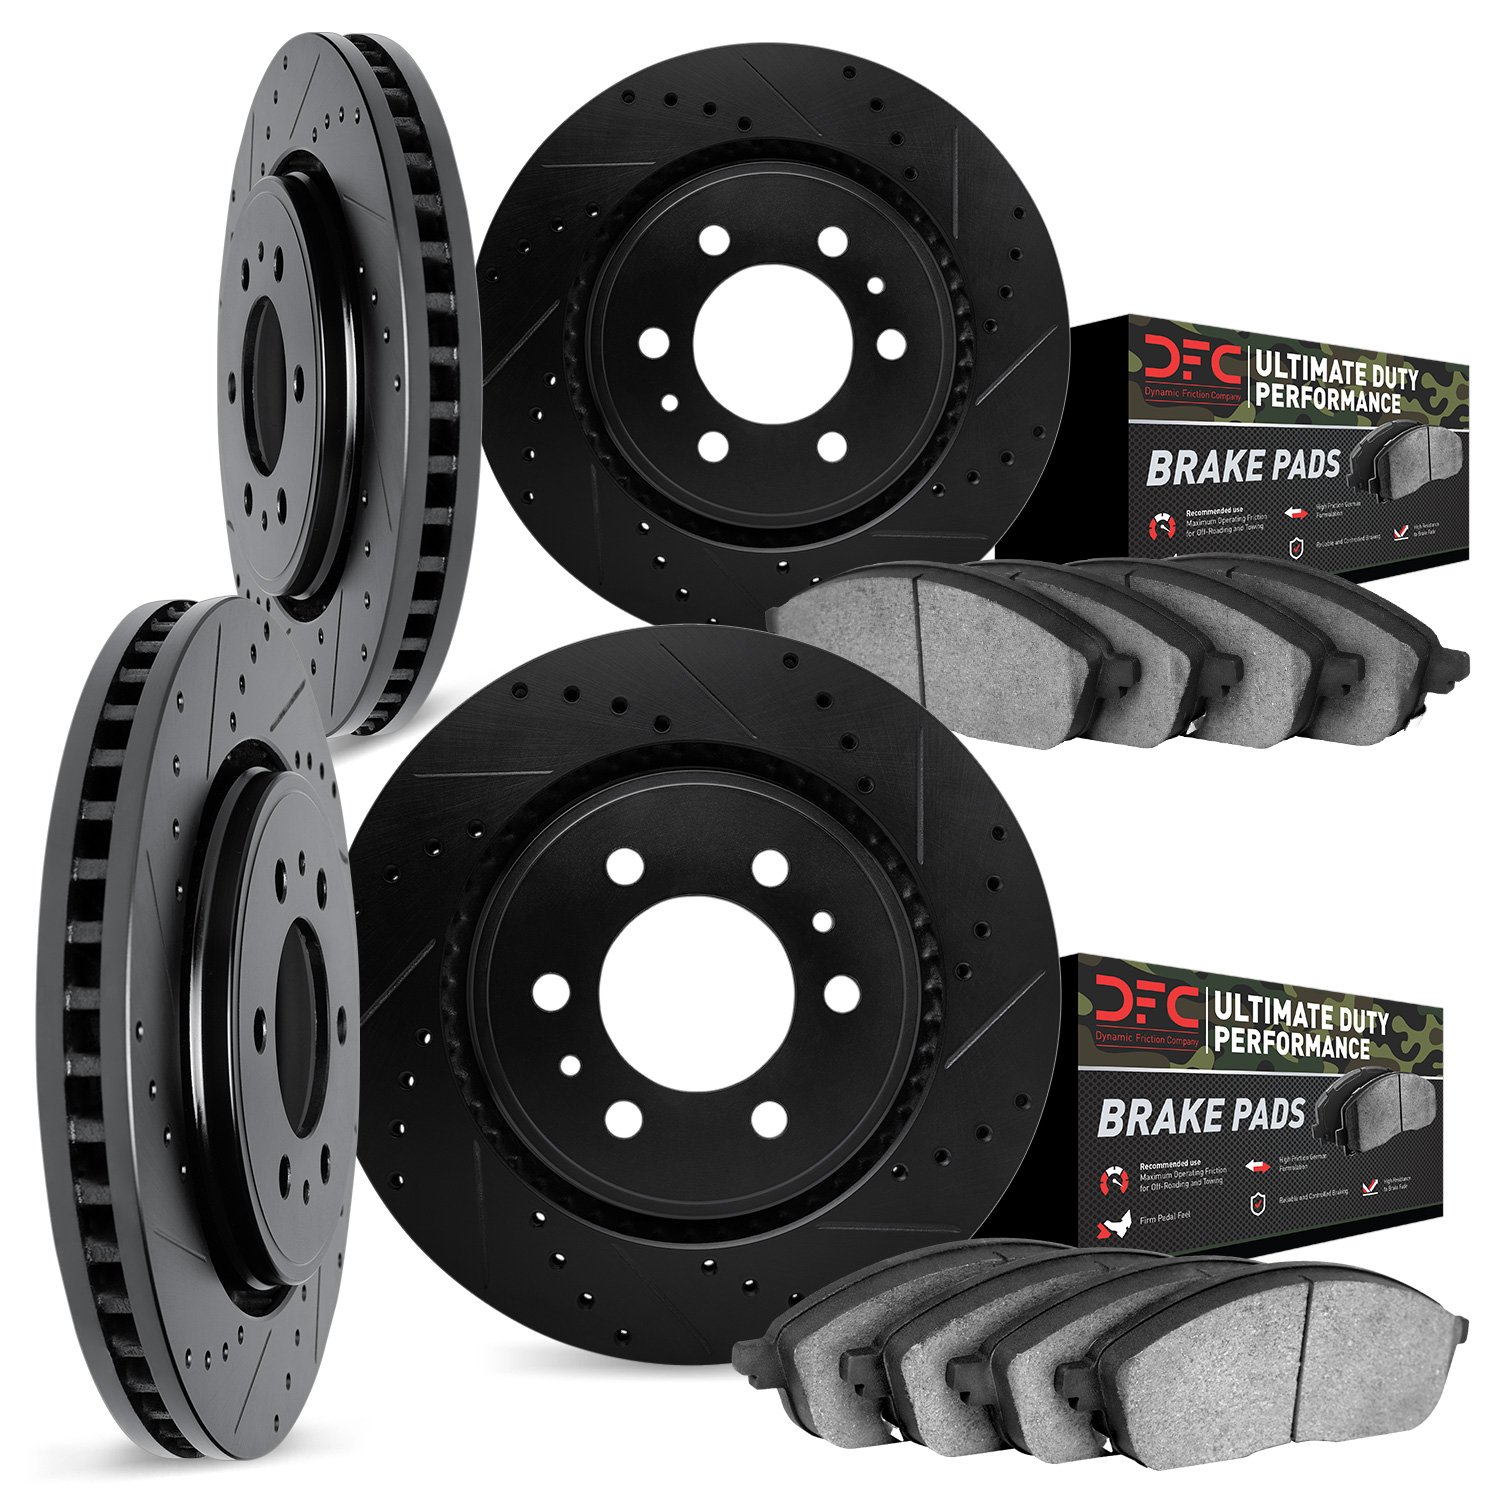 8404-76004 Drilled/Slotted Brake Rotors with Ultimate-Duty Brake Pads Kit [Black], 2003-2009 Lexus/Toyota/Scion, Position: Front